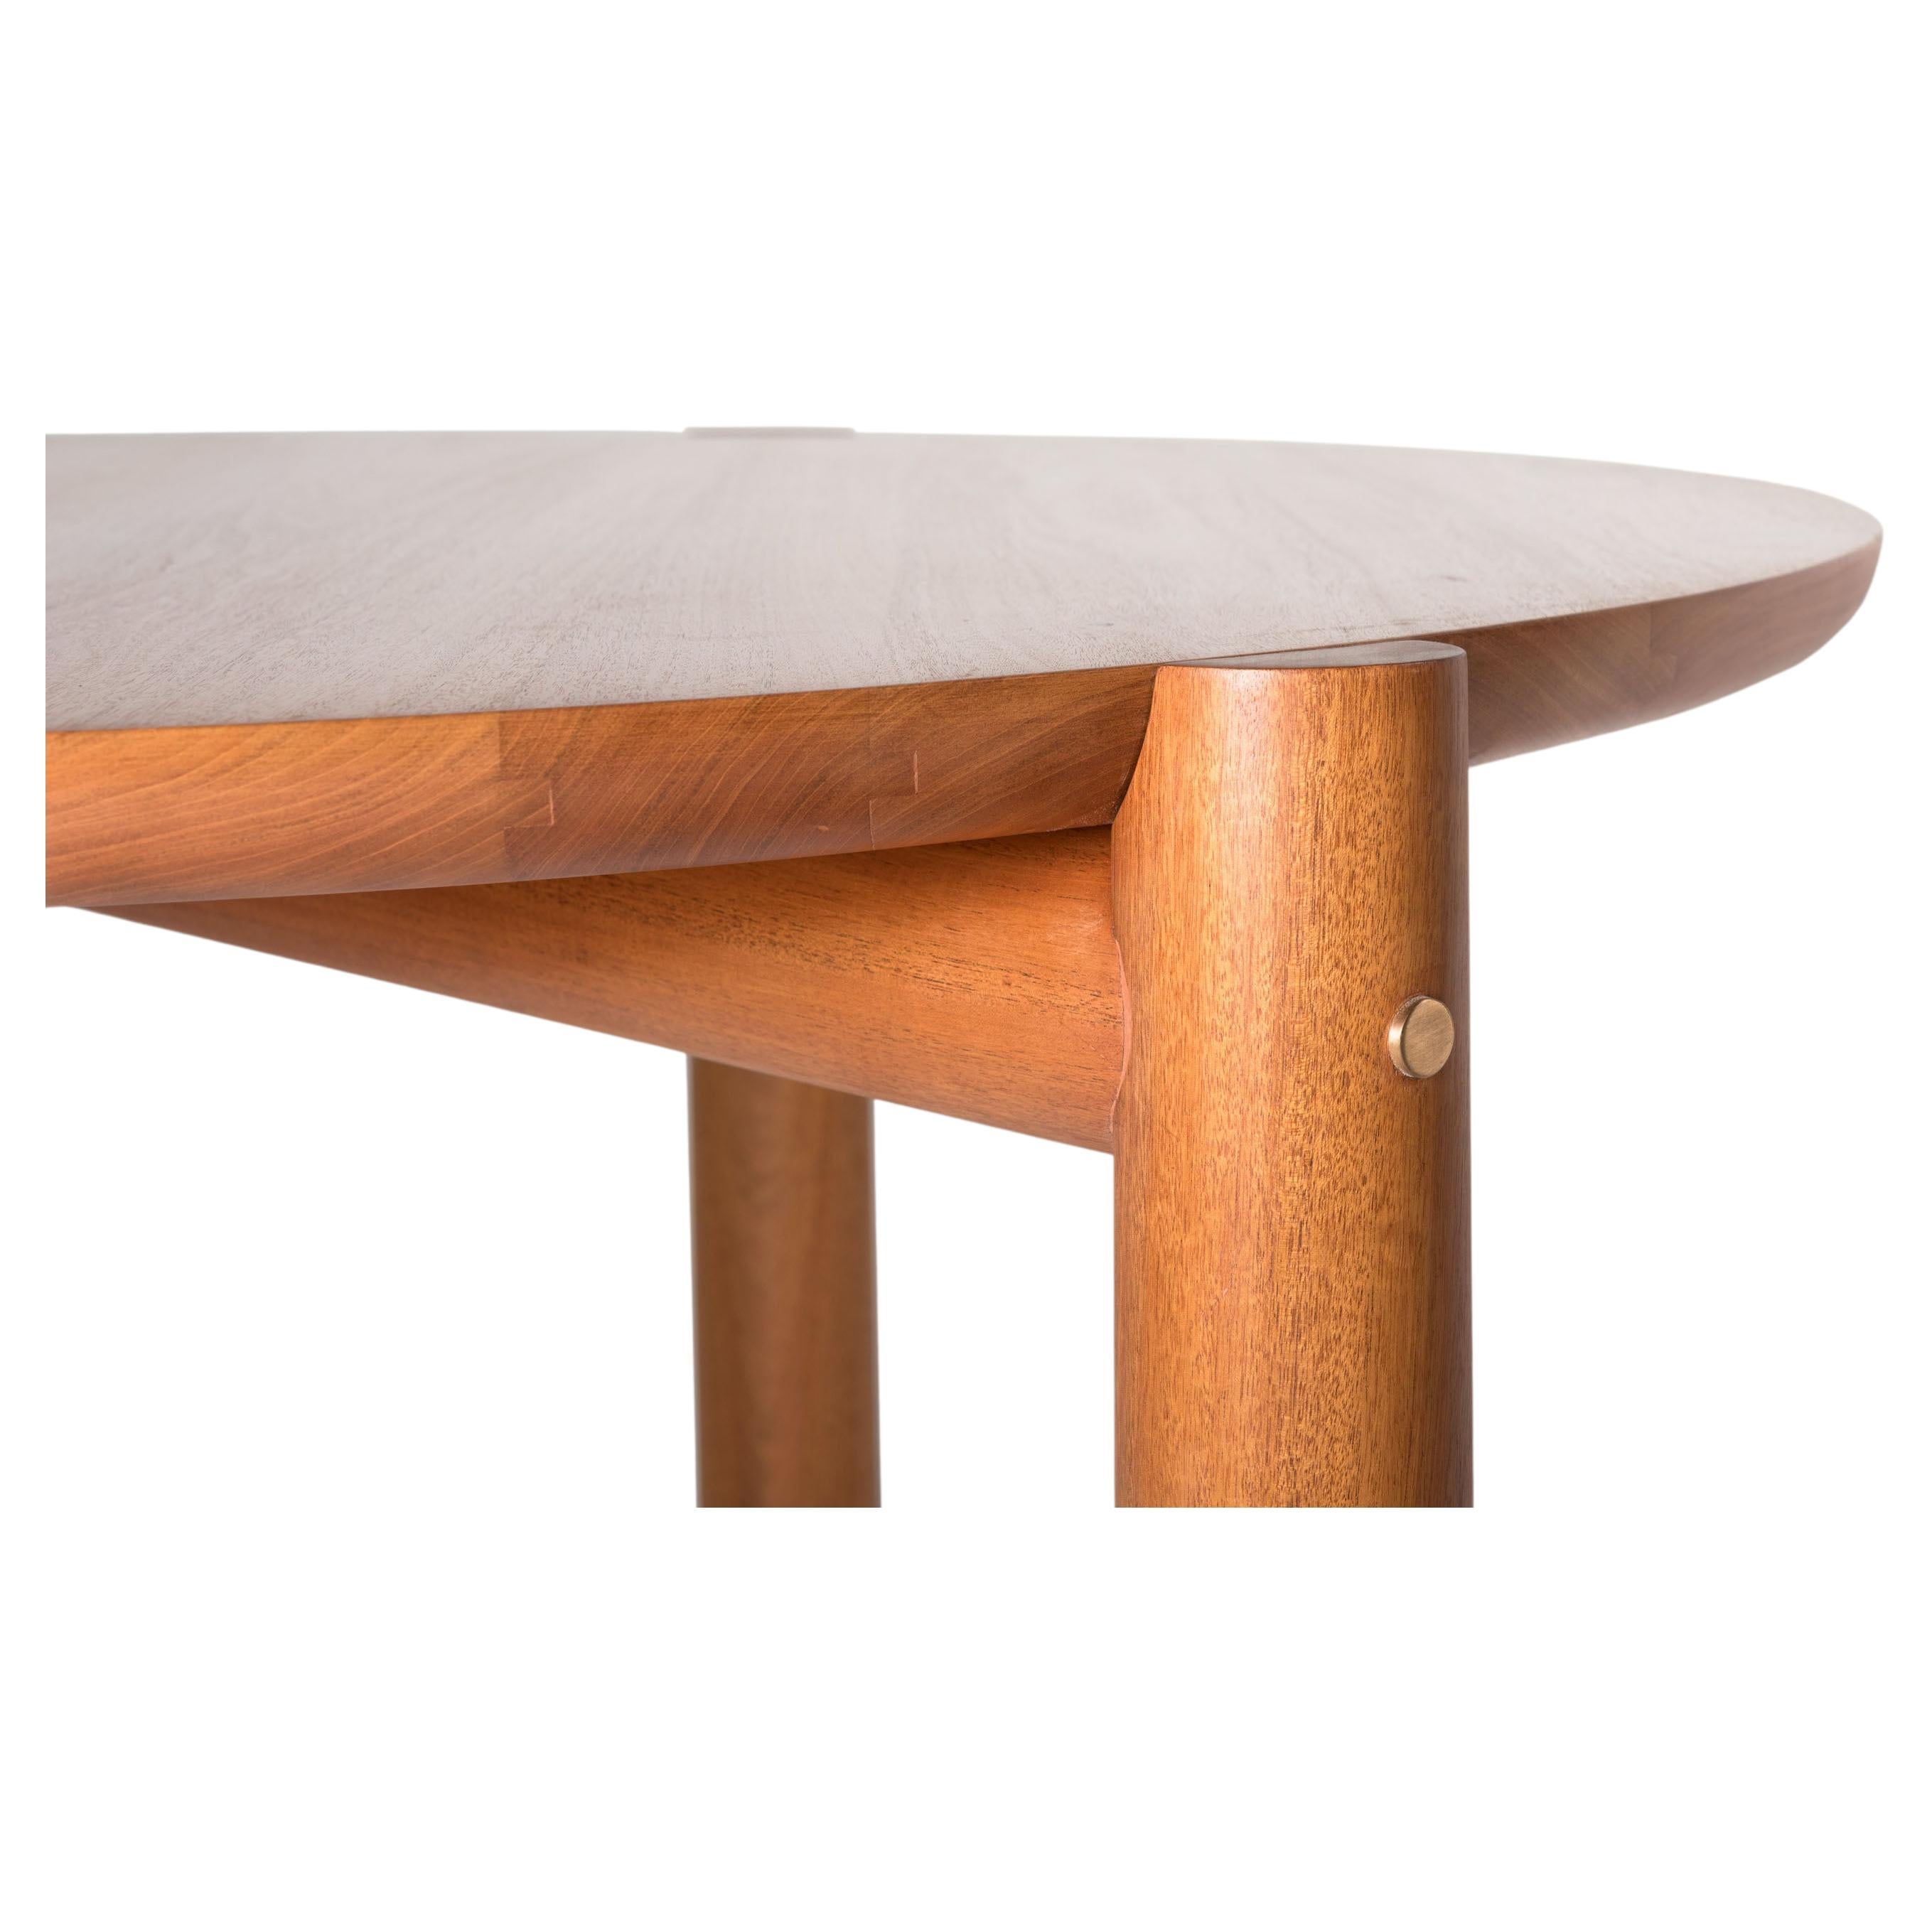 Table with a round top and three legs brought together with a clean and fine construction. It boasts fine cabinetmaking with its very beautiful and precise joints and cuts. The bronze detail, a feature on the side of each leg, fastens the base and